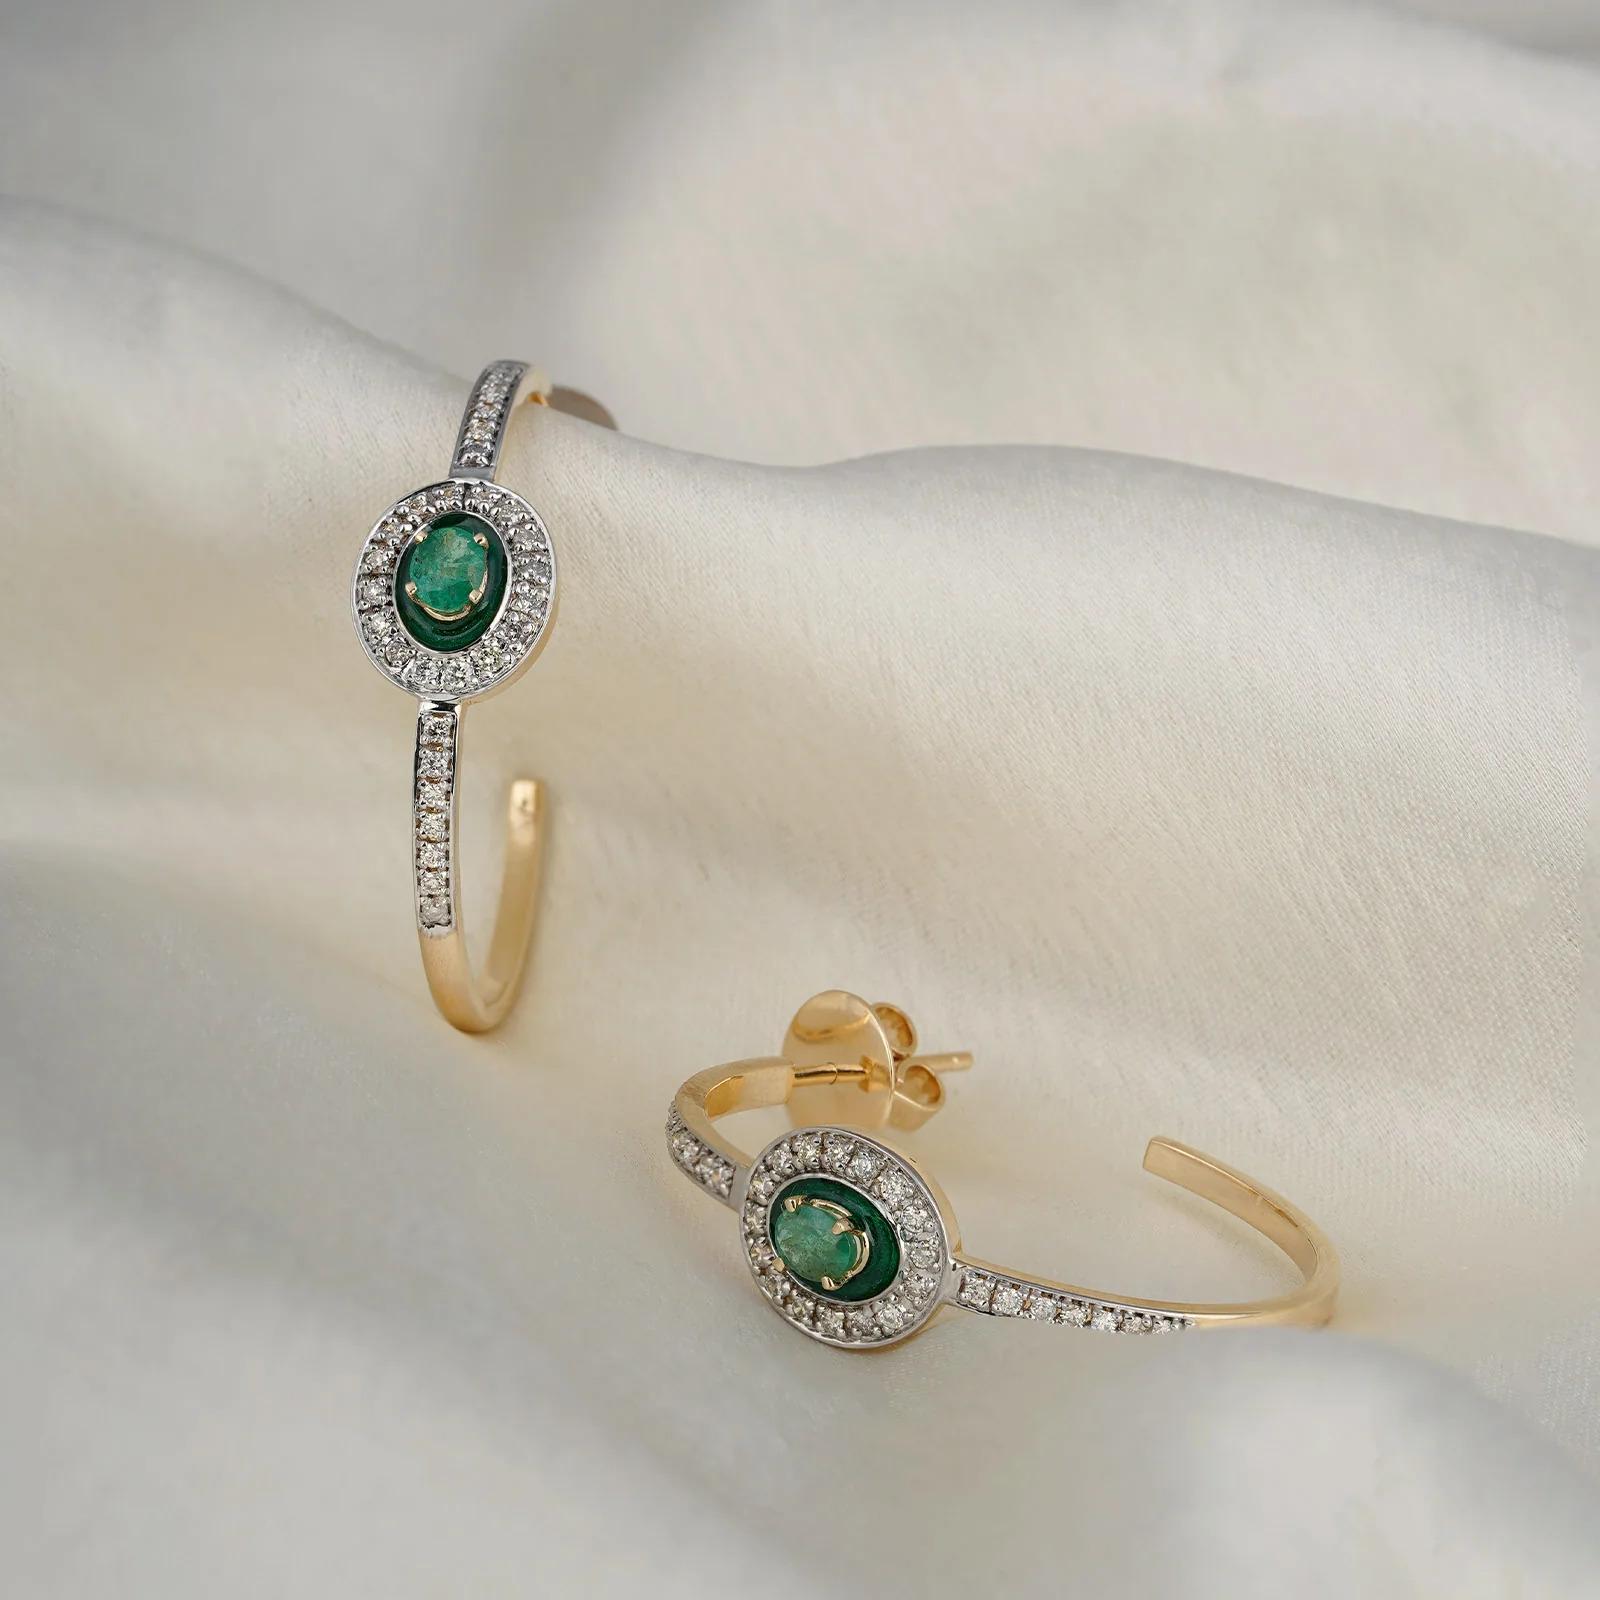 Gold(14K) : 9.0g
Brilliant cut Diamonds (VS clarity & H-I colour): 0.59ct
Gemstone : Emerald
Other : Green Enamel

We always wanted to design jewelry that is personal and sentimental and what could serve a better inspiraion than those perfect pair